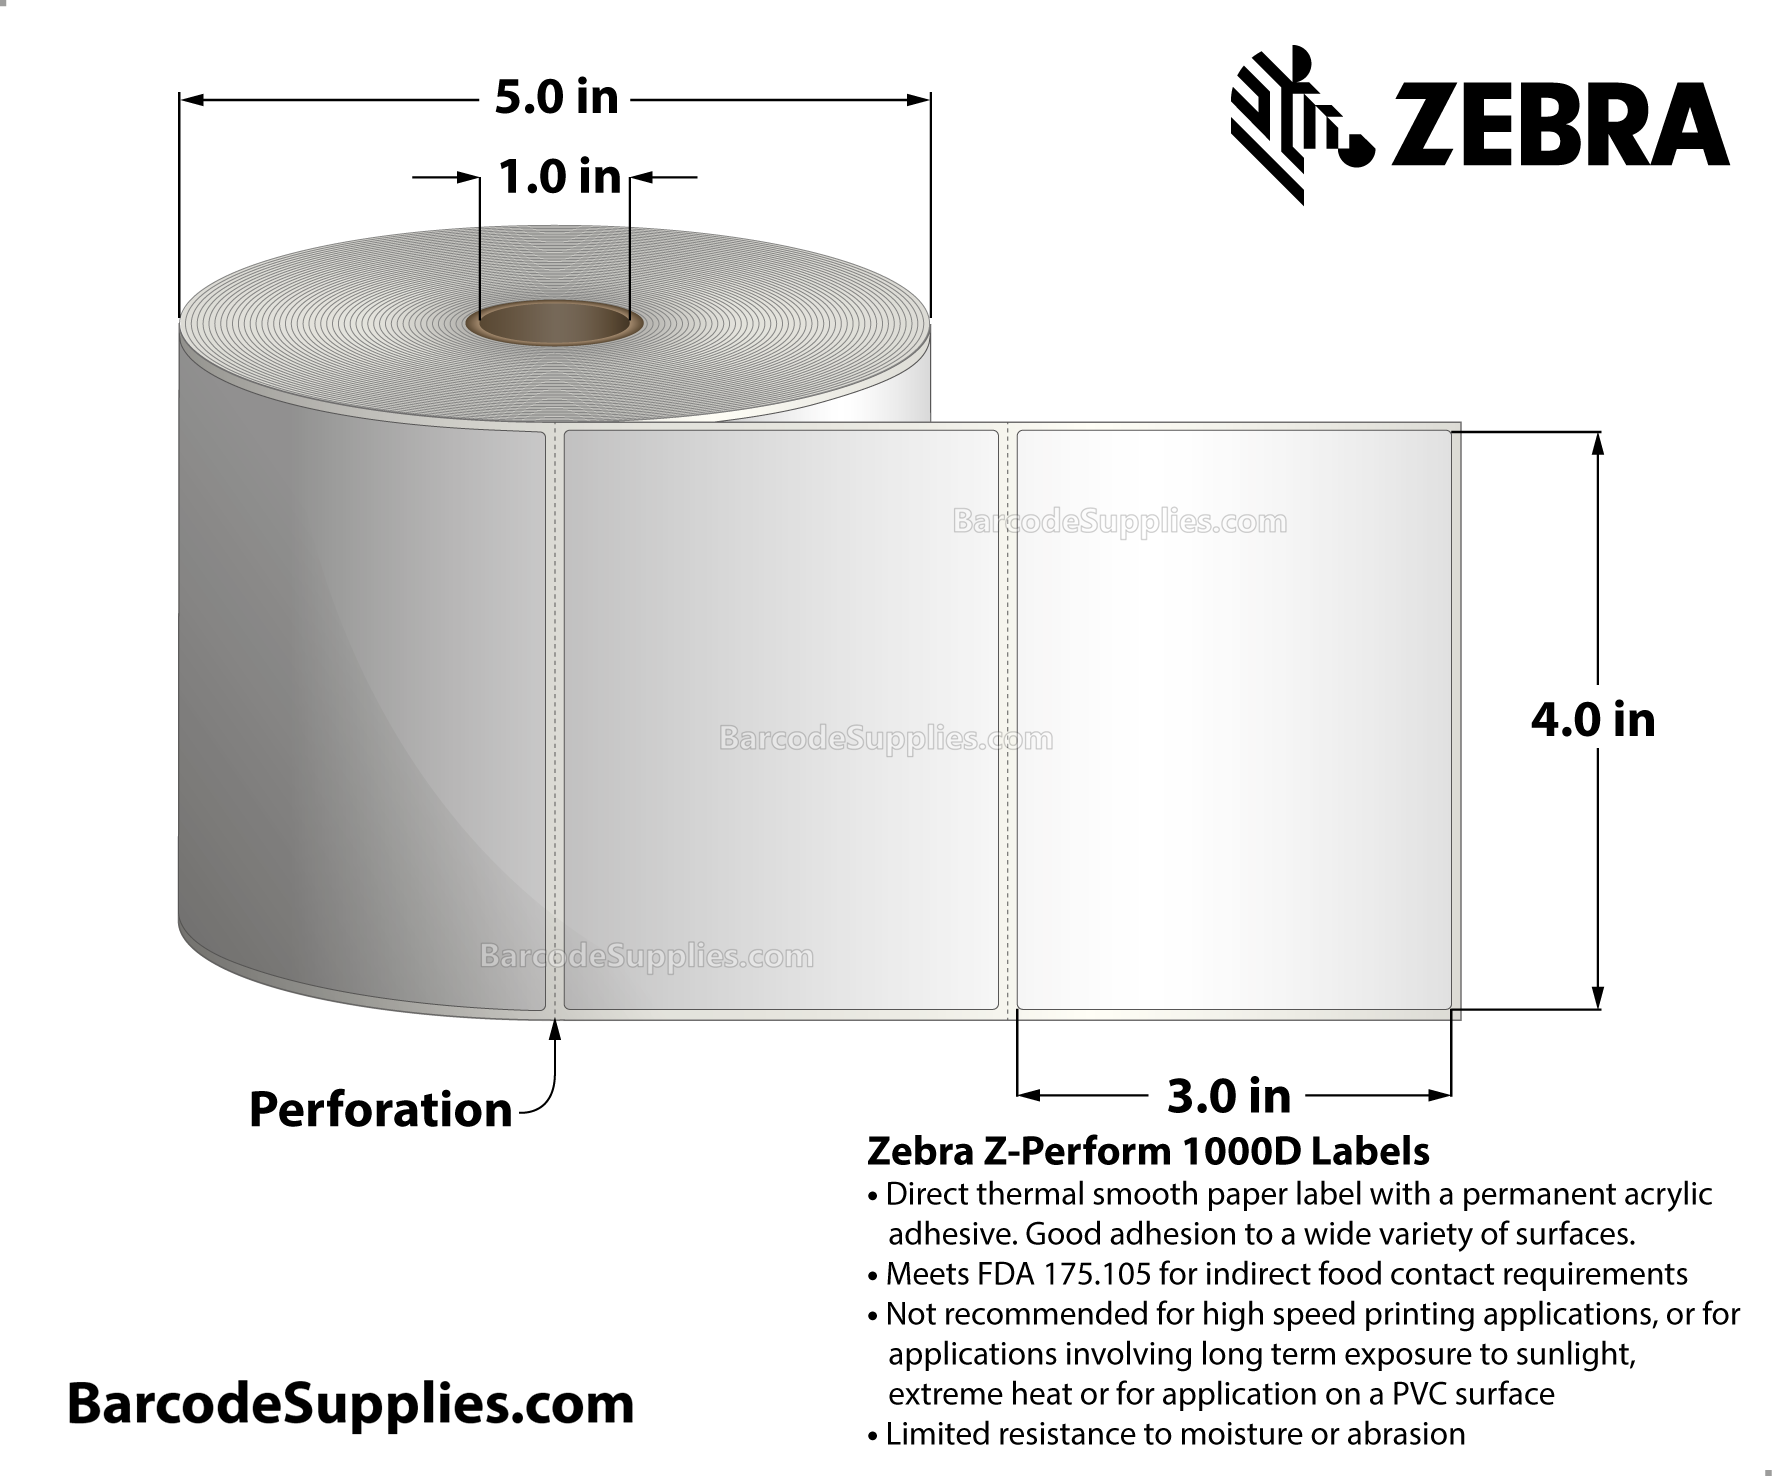 4 x 3 Direct Thermal White Z-Perform 1000D Labels With Permanent Adhesive - Perforated - 840 Labels Per Roll - Carton Of 6 Rolls - 5040 Labels Total - MPN: 10026380